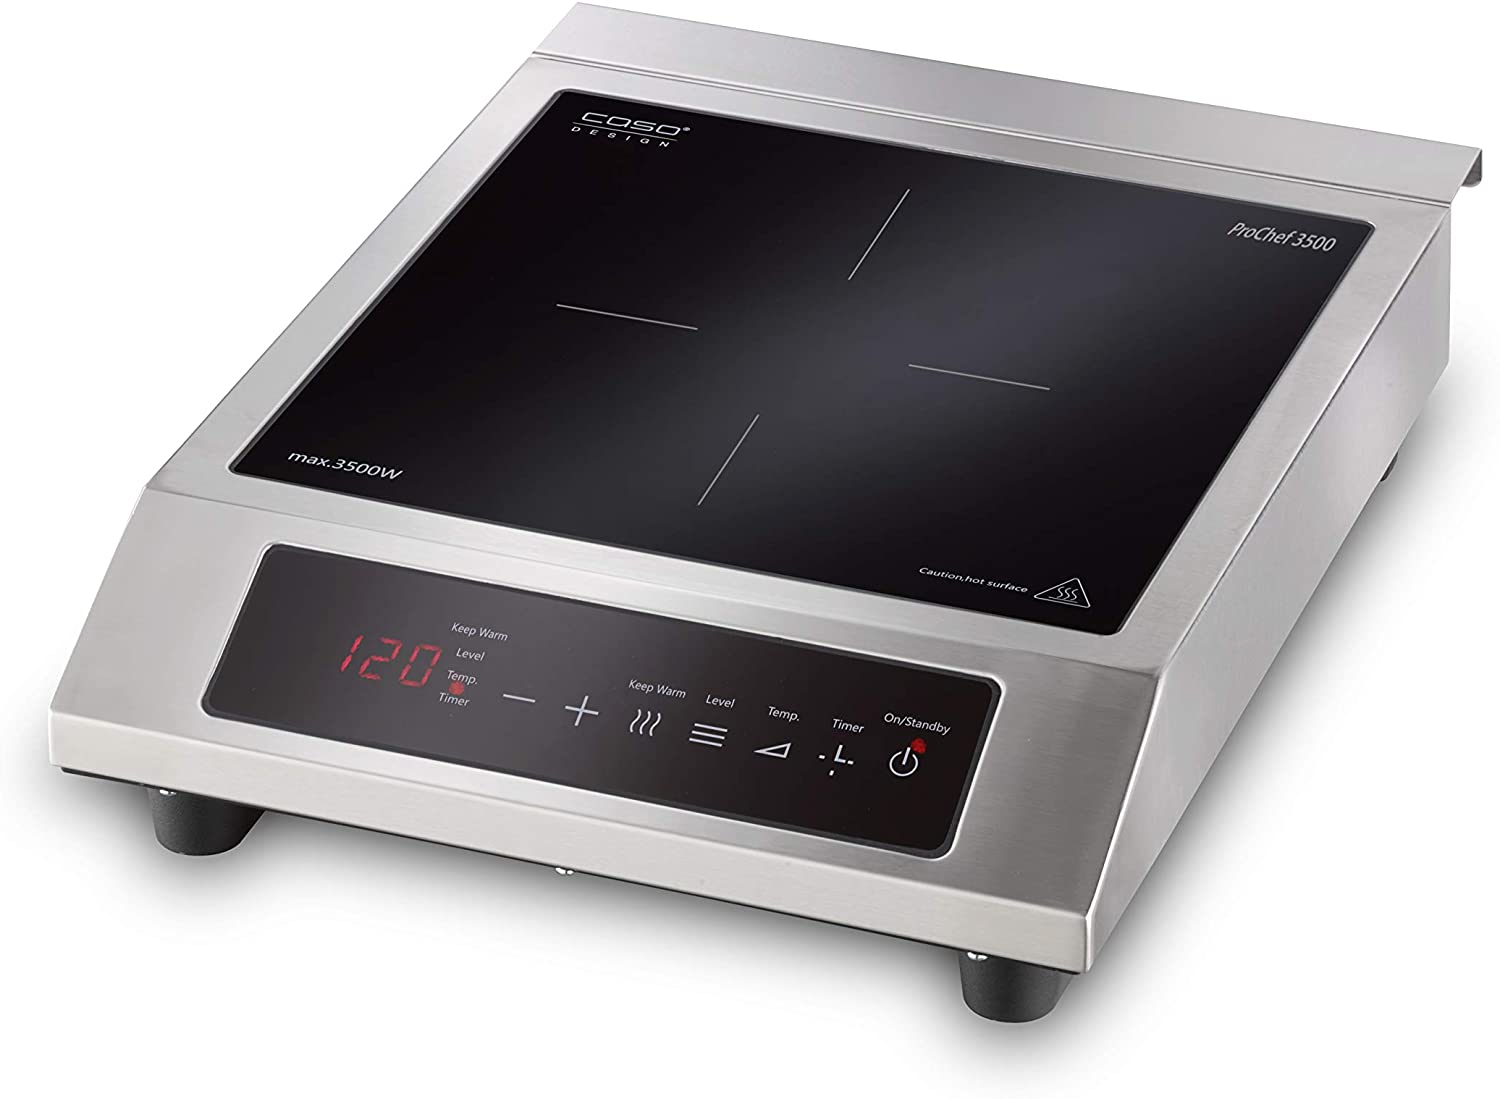 CASO ProChef 3500 Induction Hob Mobile, Powerful 3500 Watt, 60-240 °C, Keep Warm Mode, 24 Hour Timer, Pots up to 26 cm, Glass Ceramic Stainless Steel